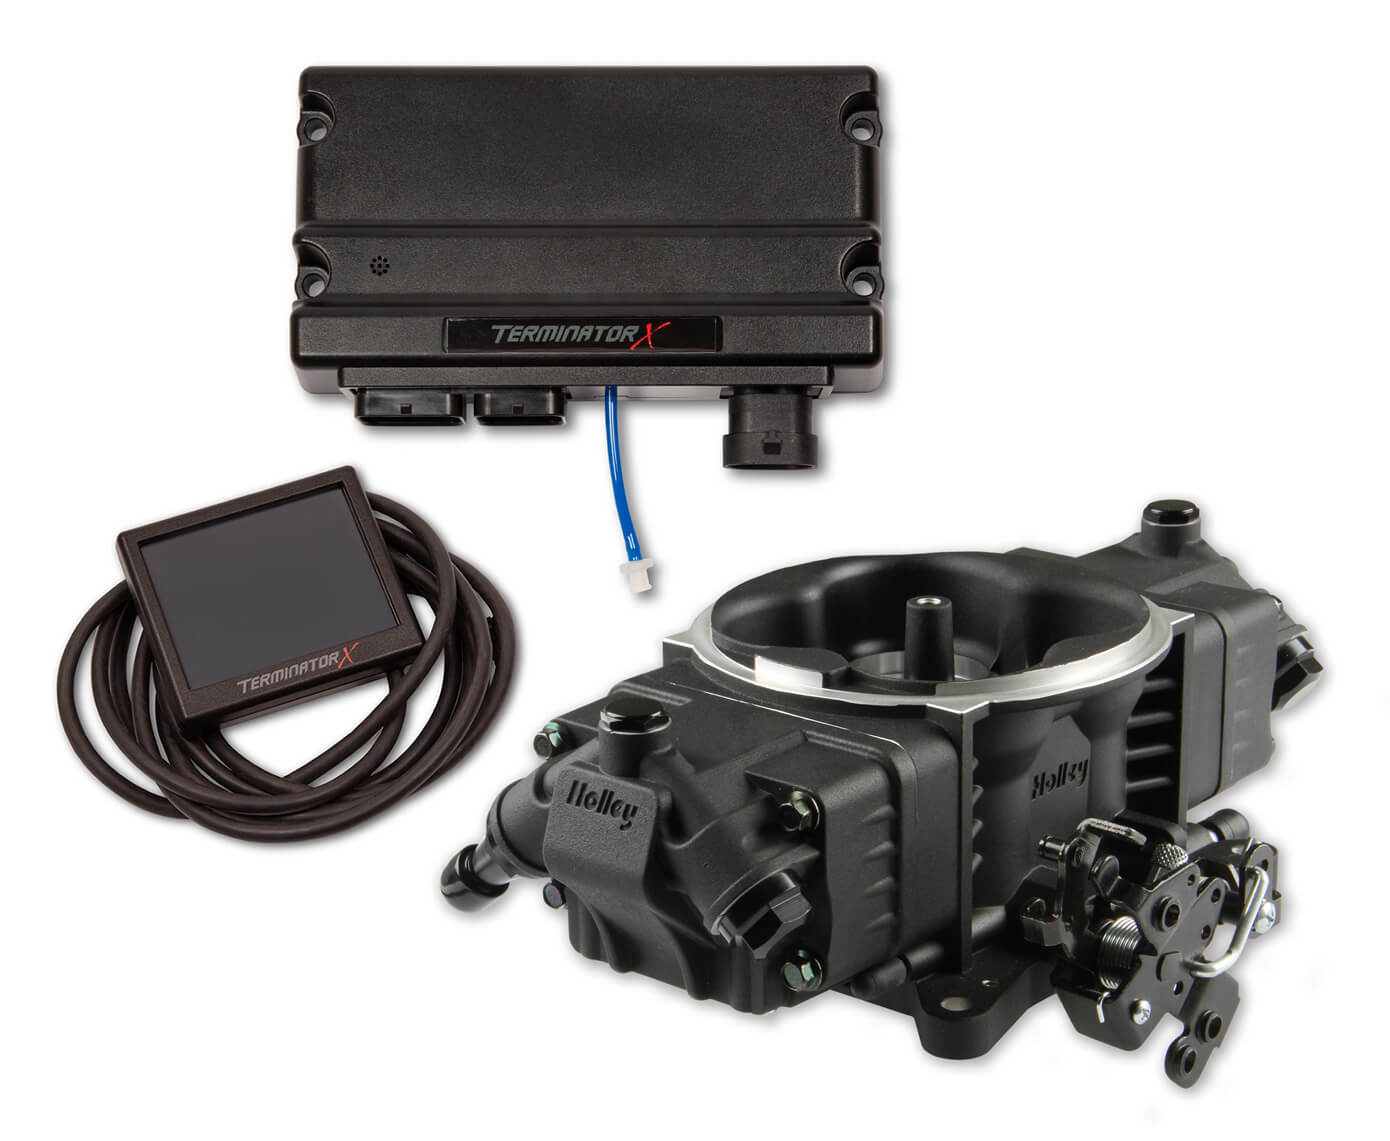 Terminator X Stealth 4150 EFI System for GM LS Engines with 24x Ignition [Black Finish]